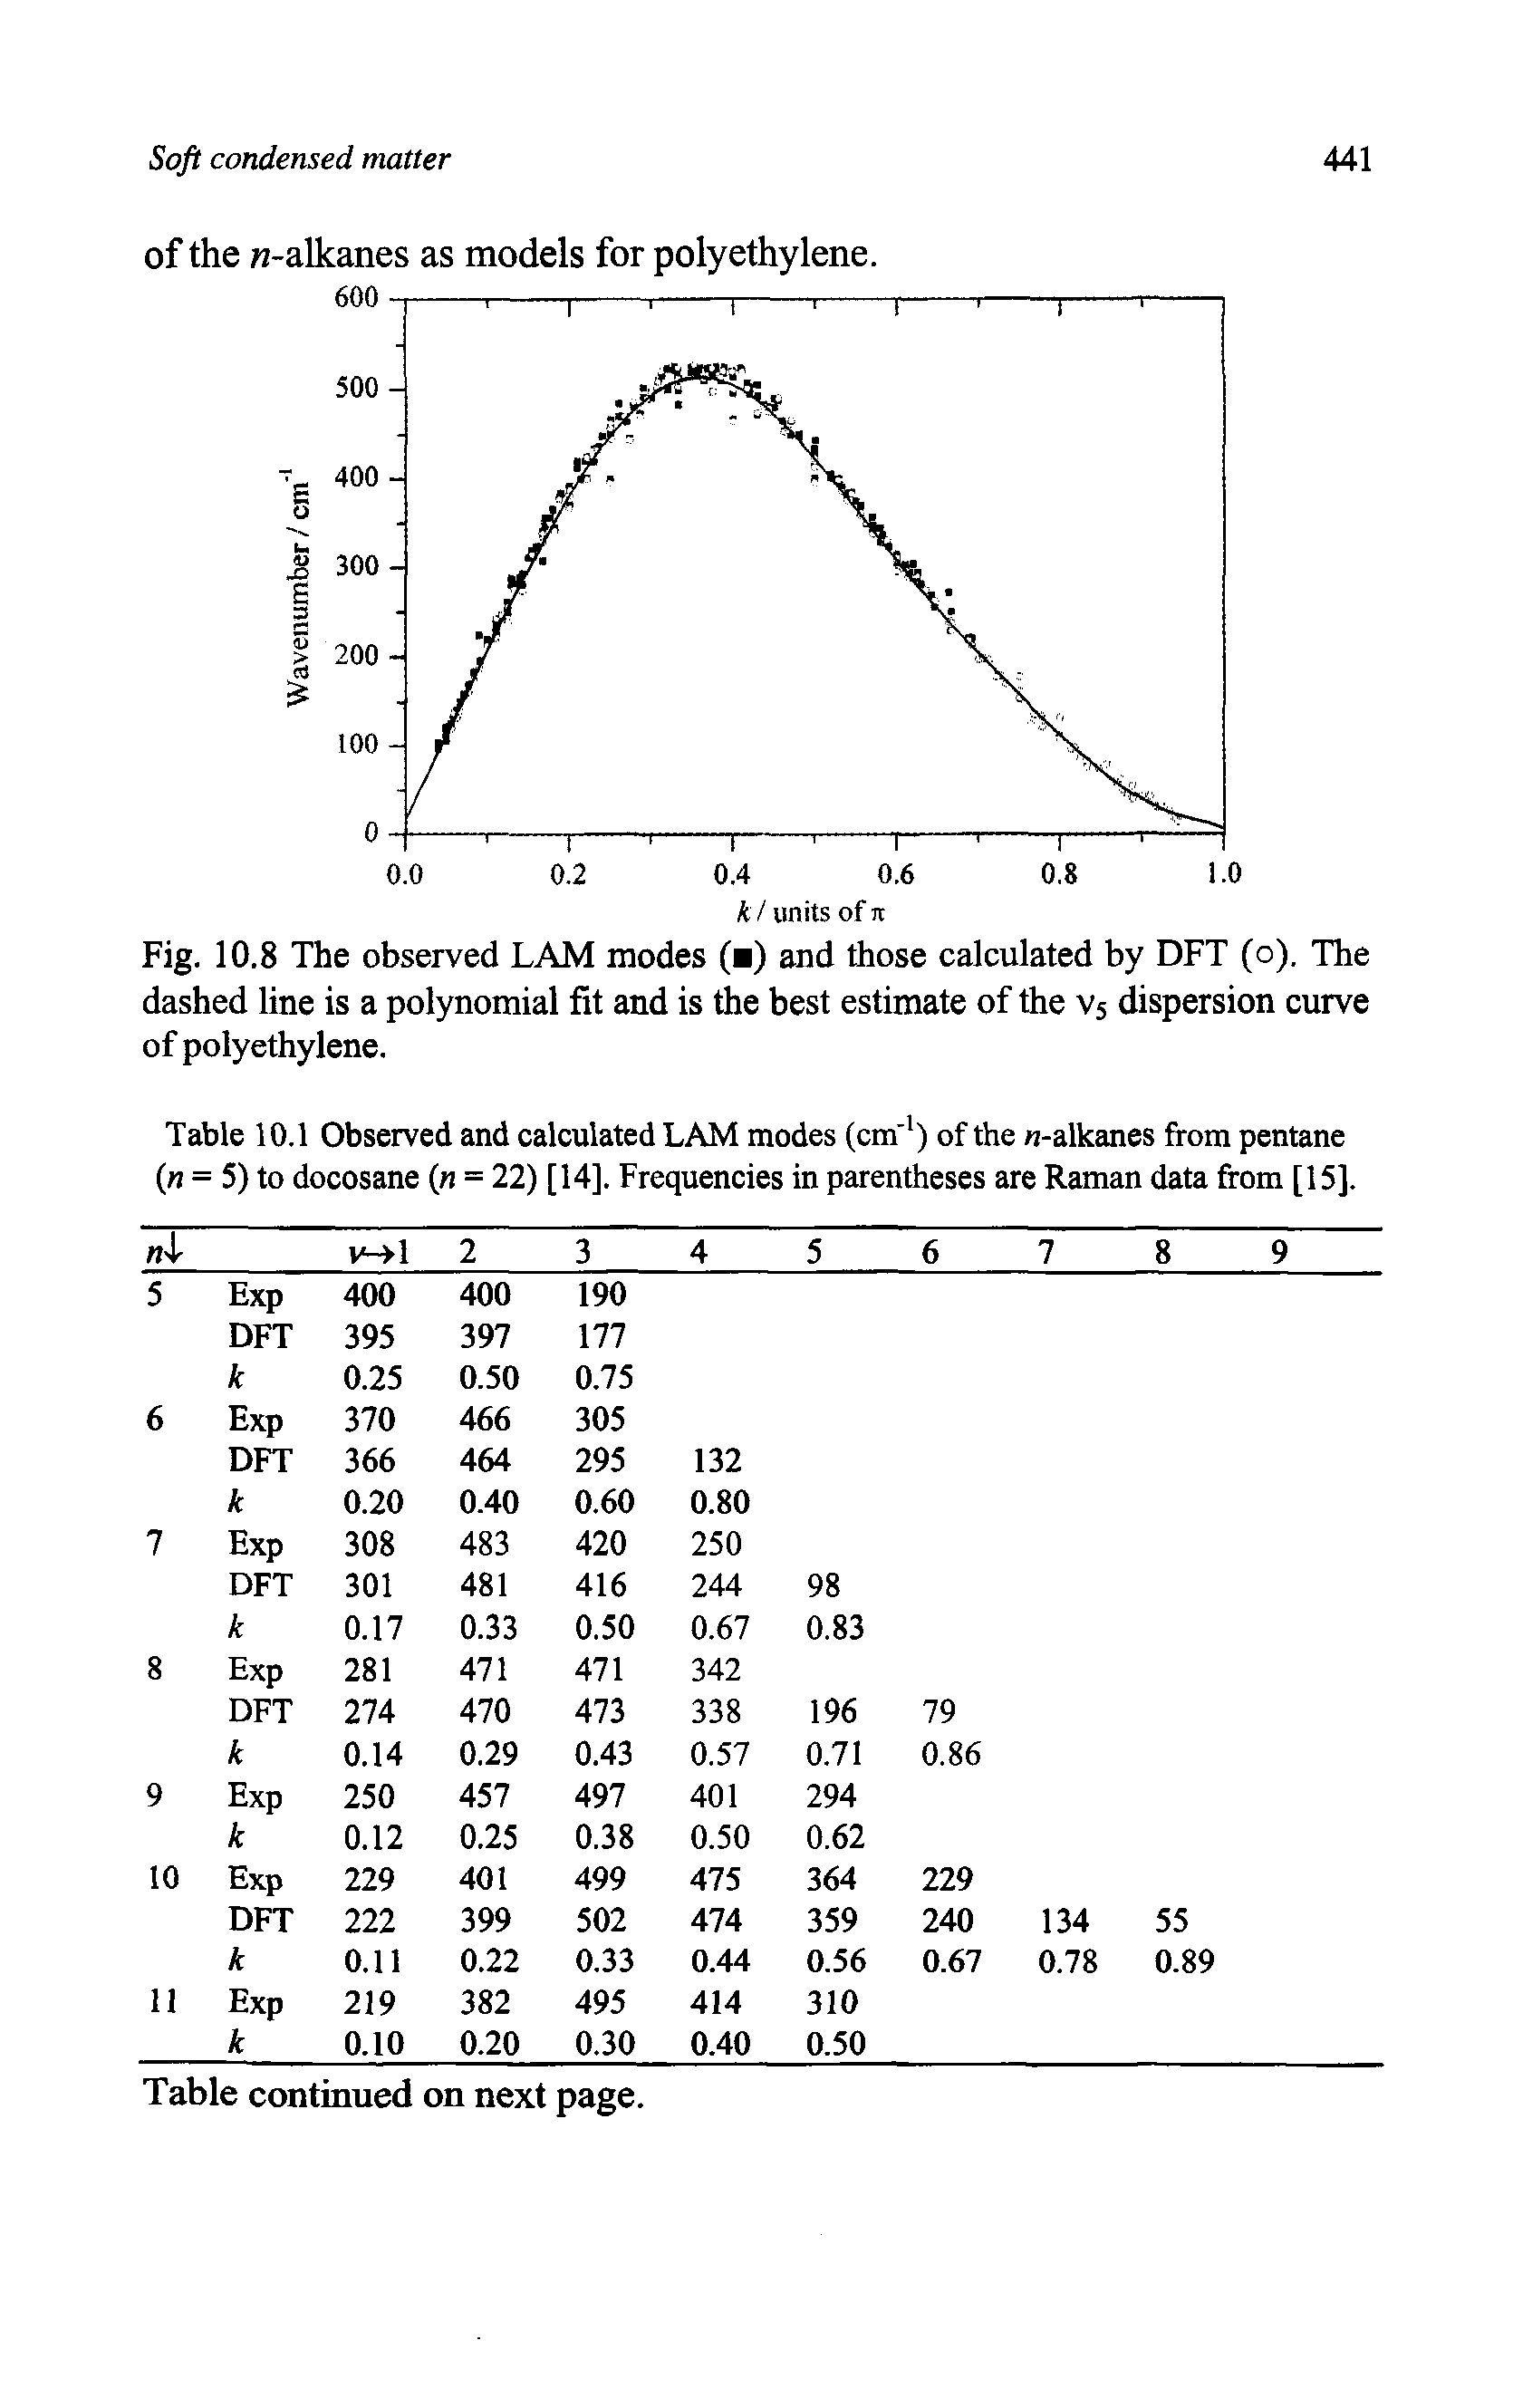 Table 10.1 Observed and calculated LAM modes (cm" ) of the -alkanes from pentane (n = 5) to docosane (n = 22) [14]. Frequencies in parentheses are Raman data from [15].